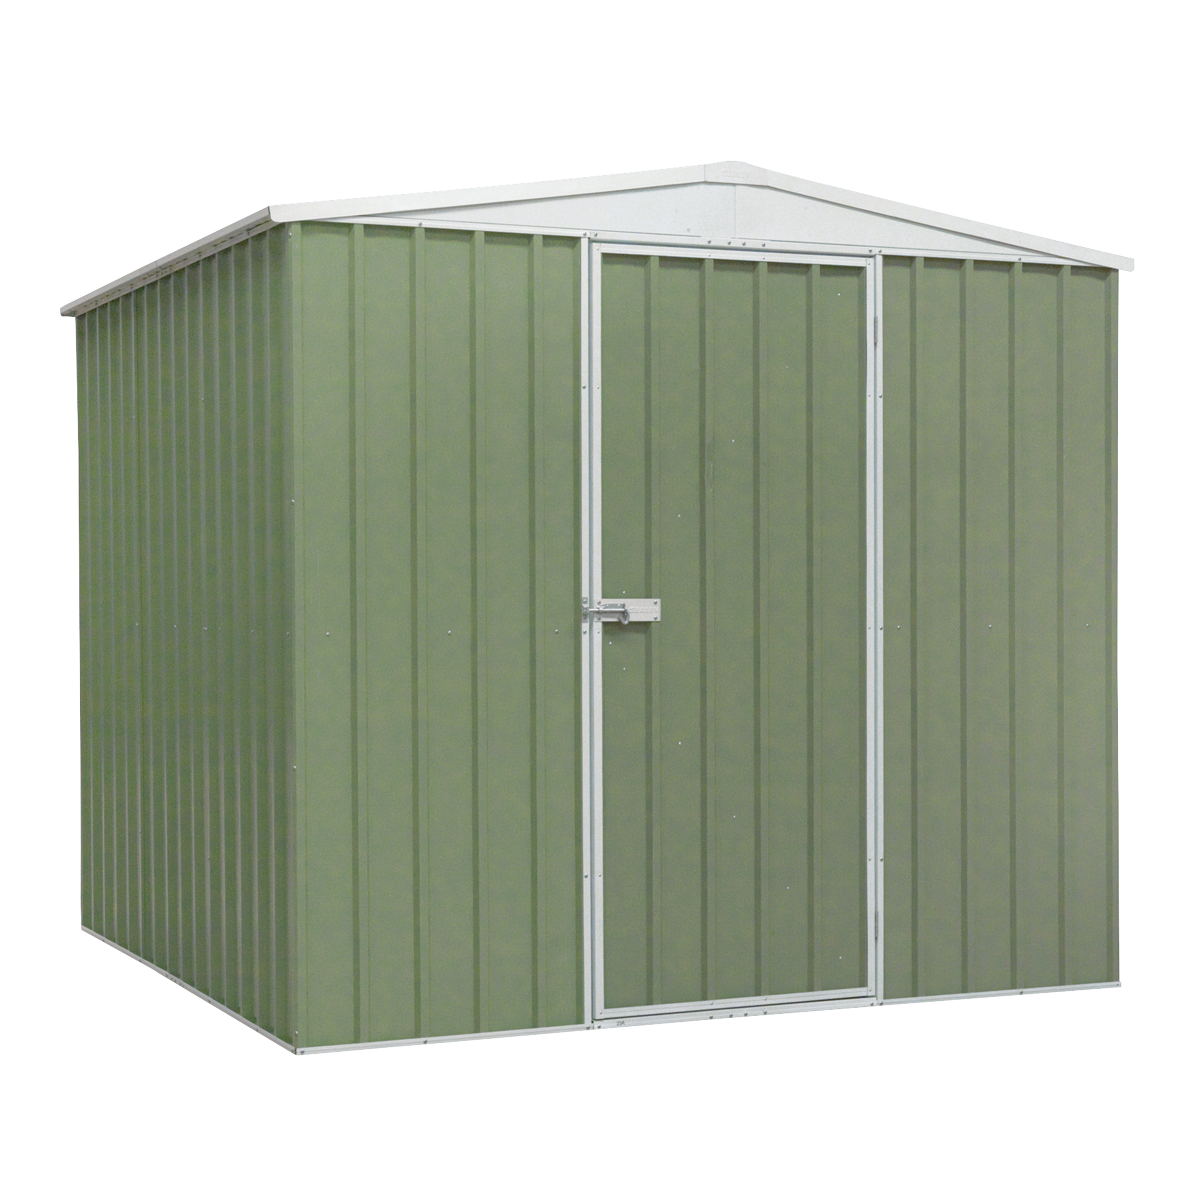 Dellonda Galvanized Steel Garden/Outdoor/Storage Shed, 1.5 x 0.8 x 1.9m, Pent Style Roof - Green